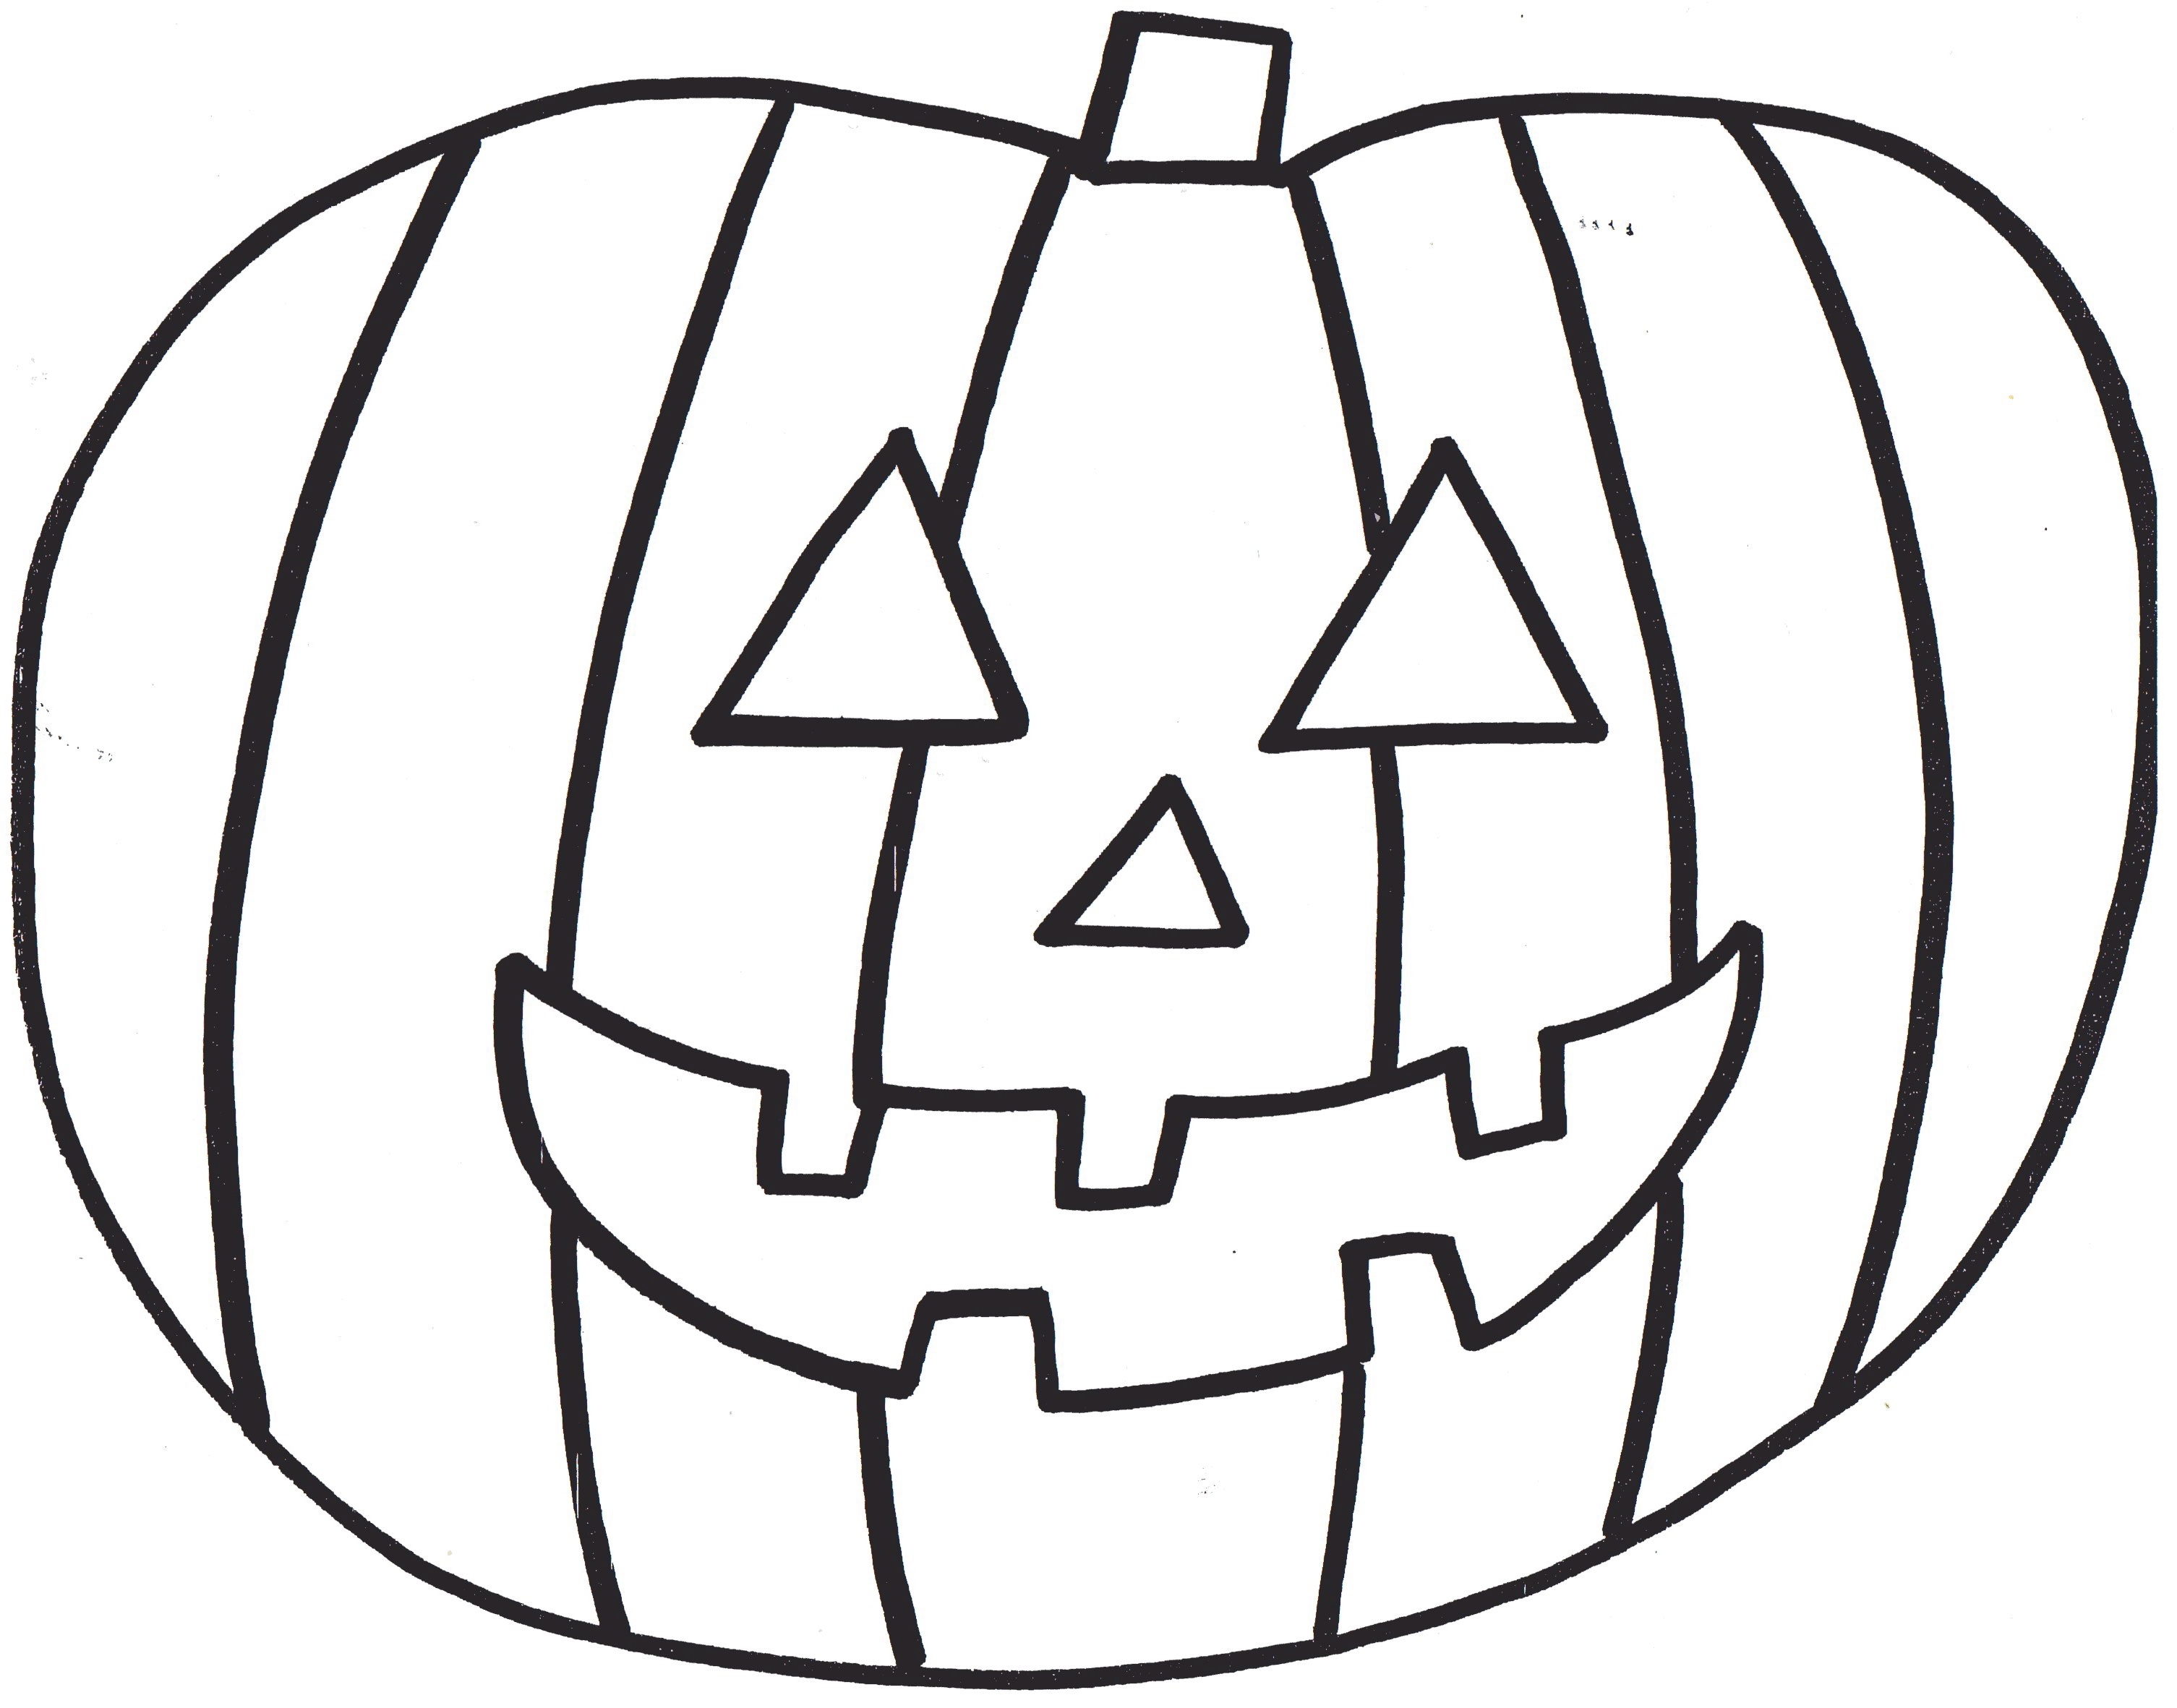 Pumpkin coloring pages to download and print for free